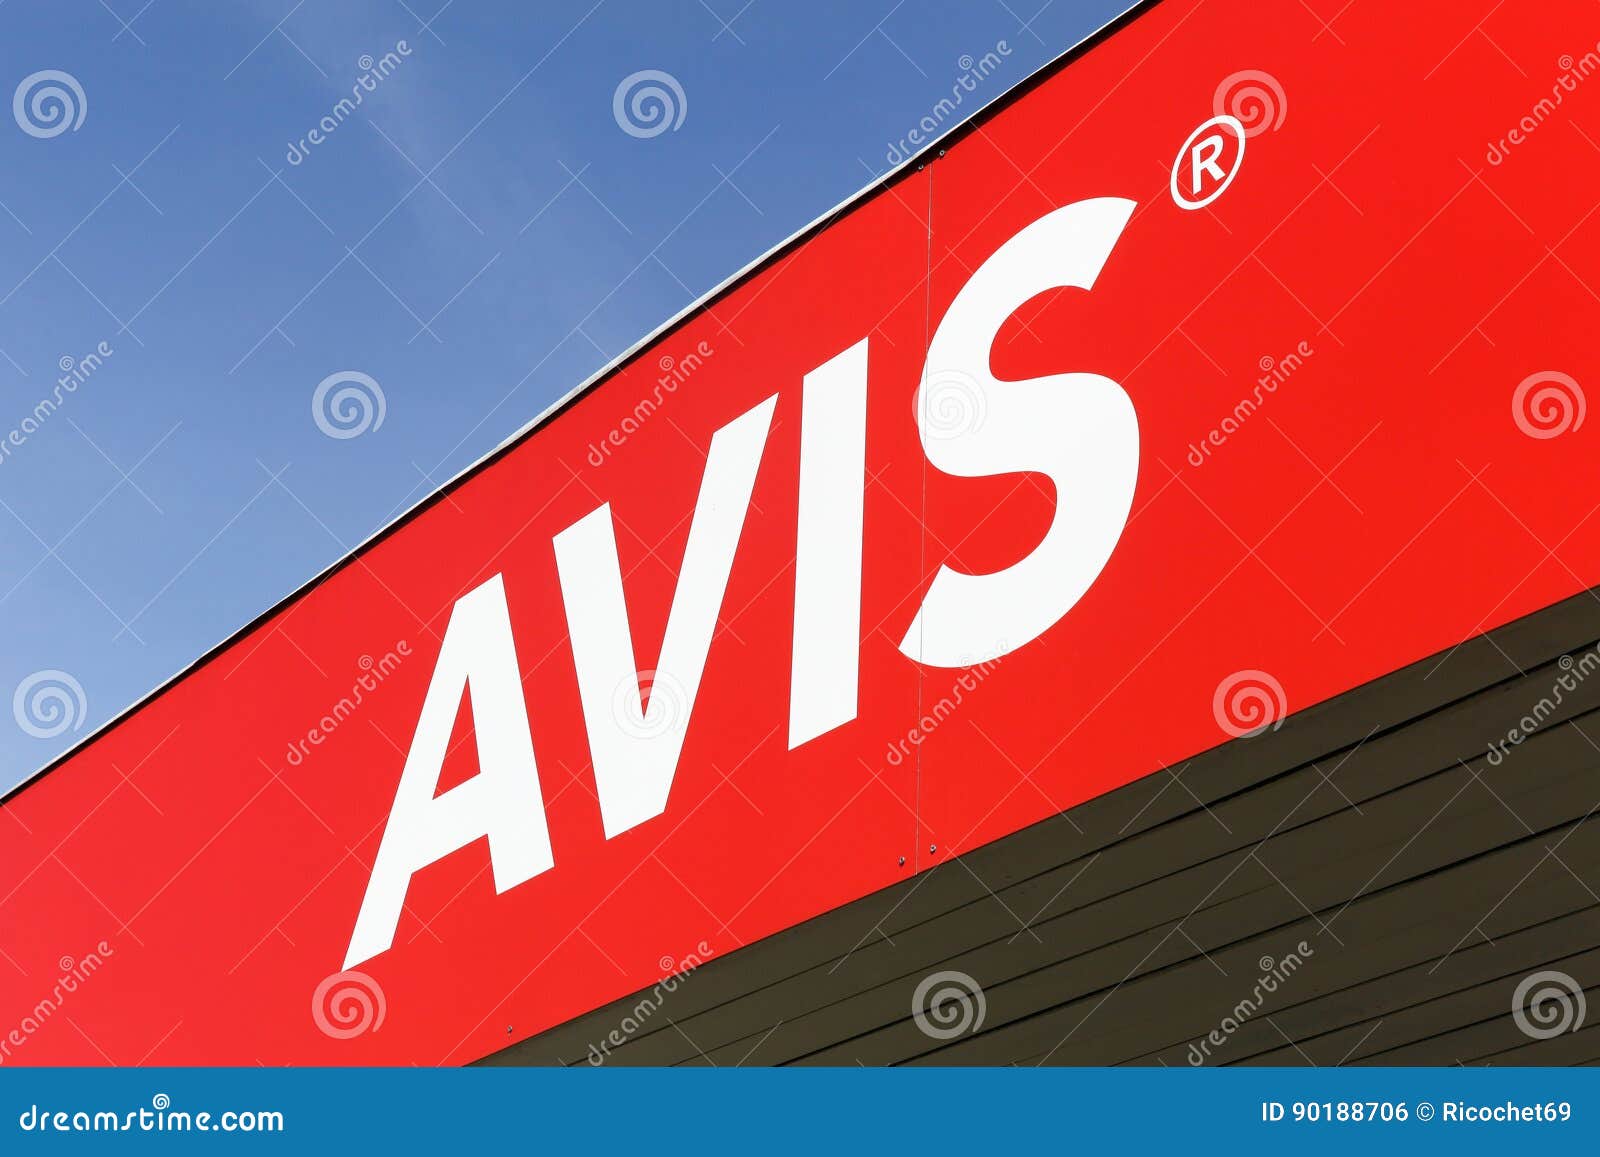 Avis logo a editorial Image of firm, industry - 90188706